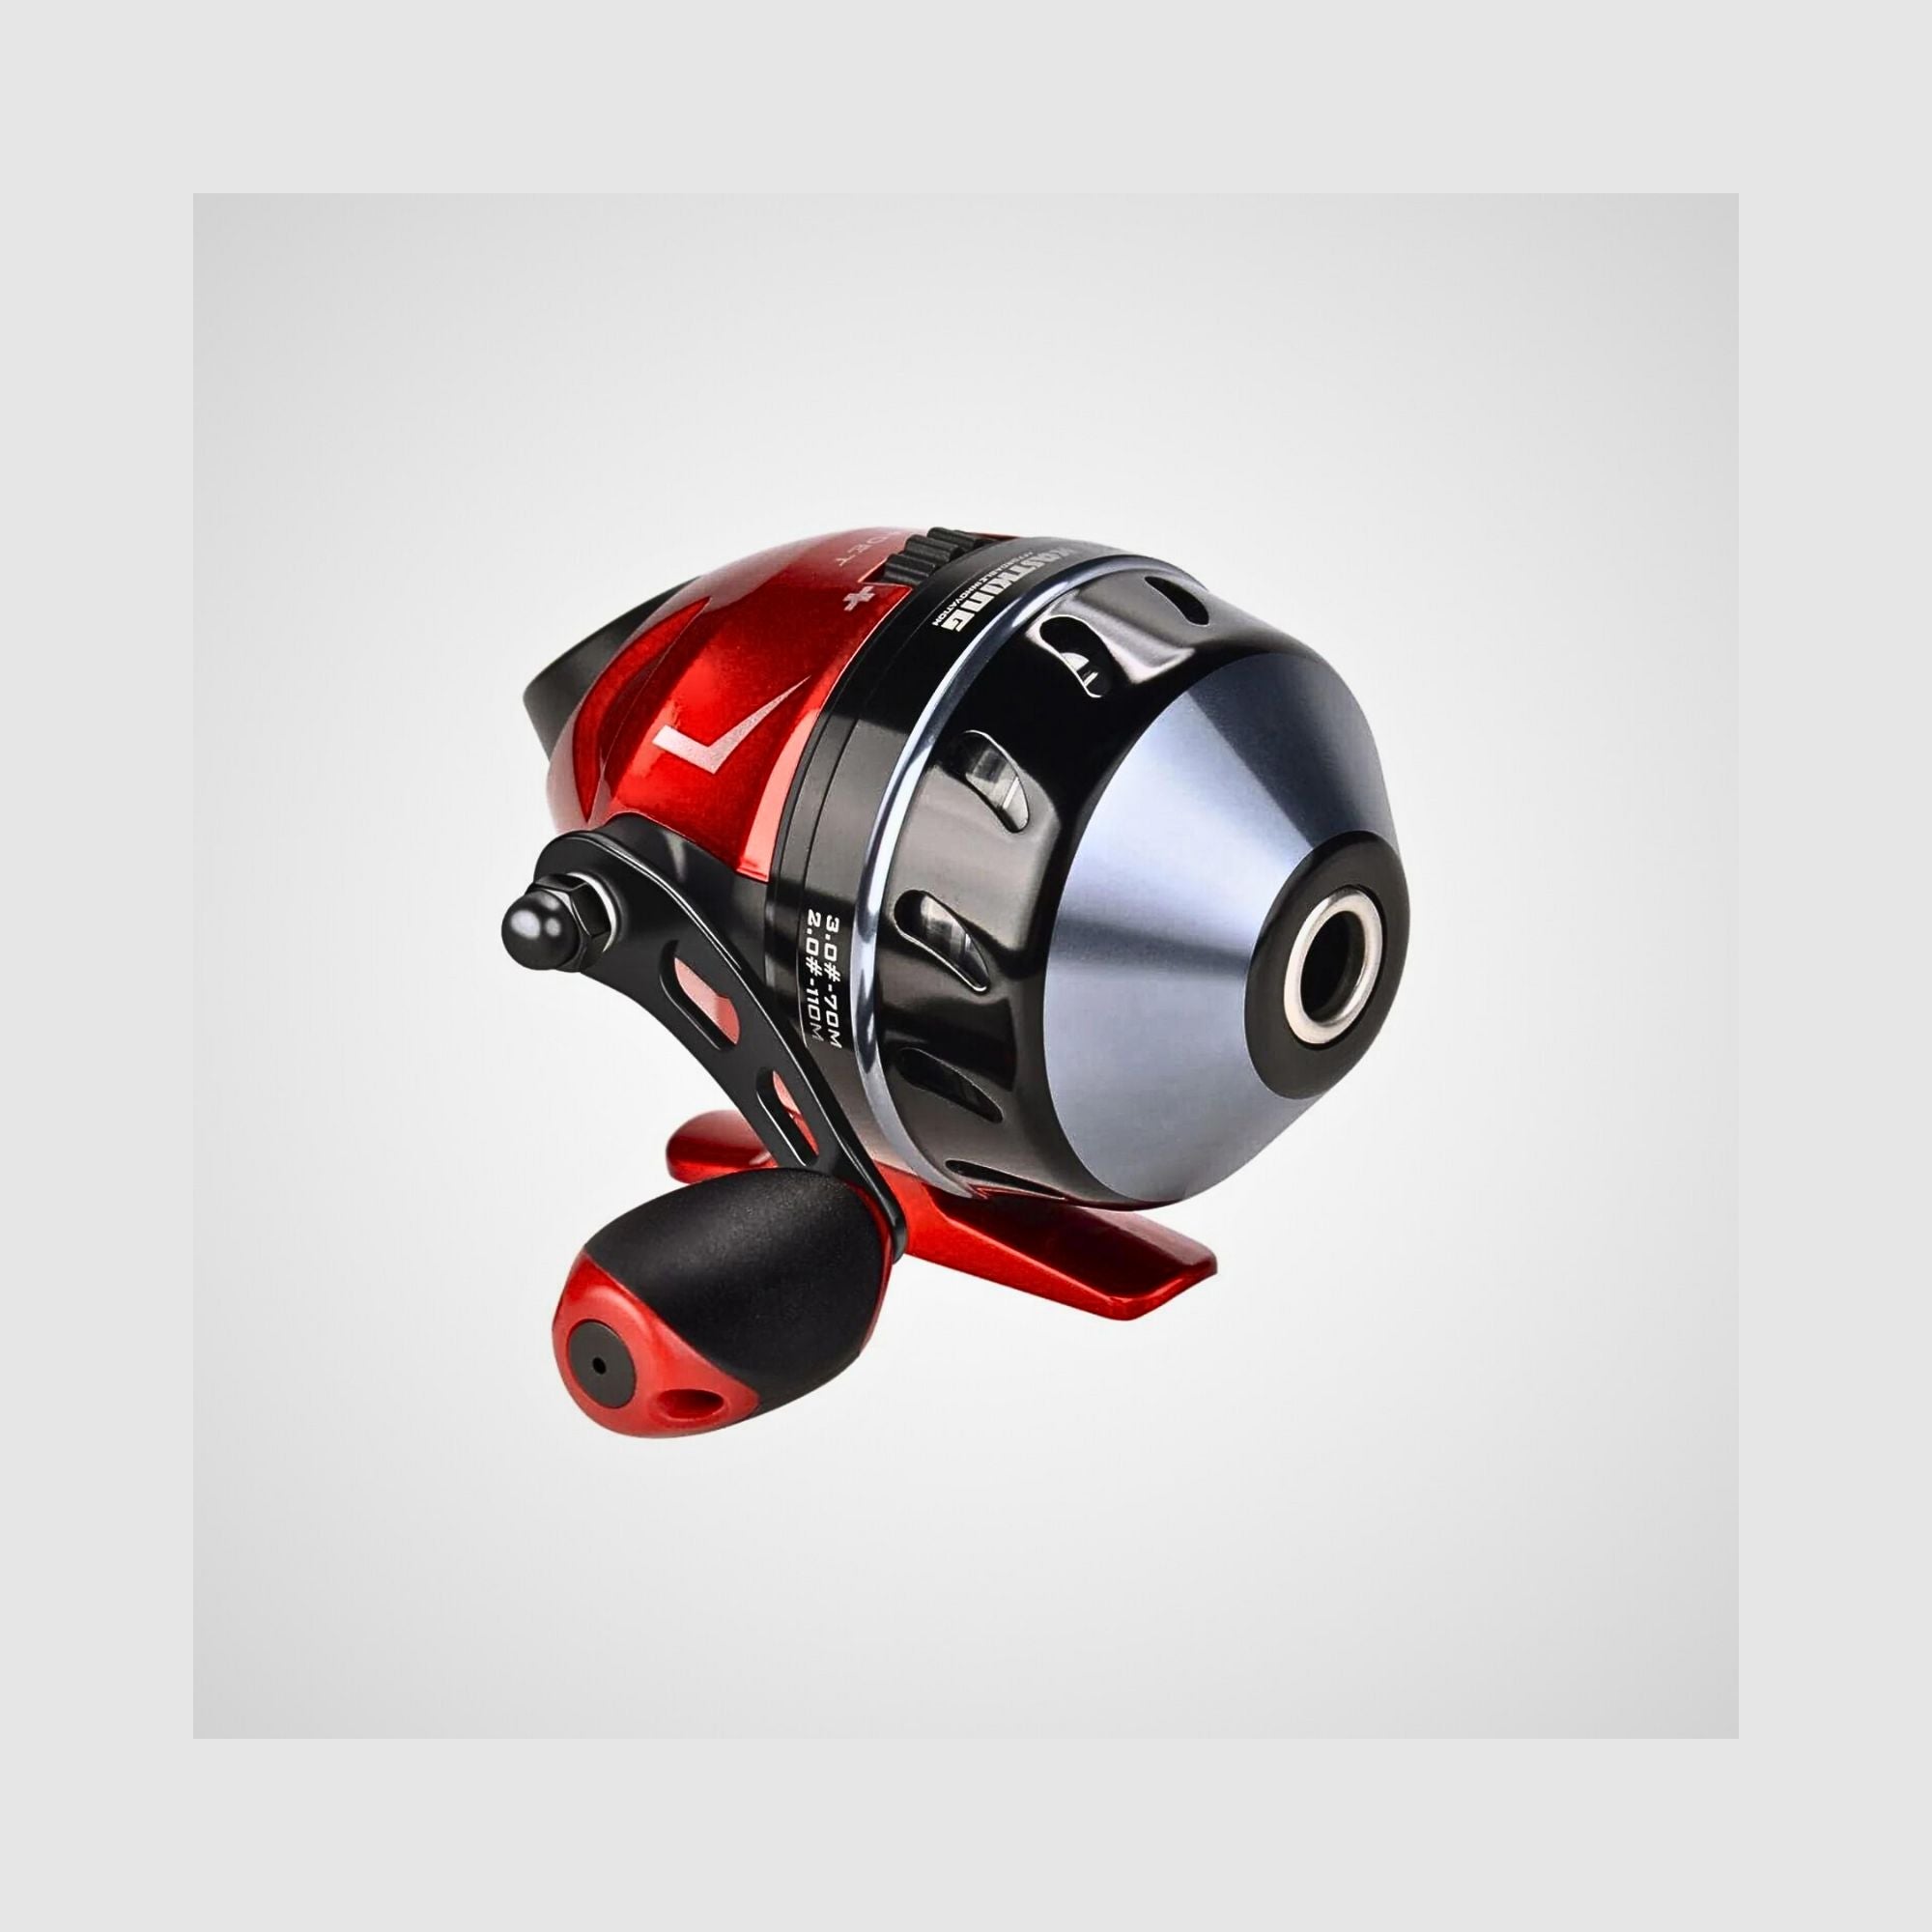 Cadet Spincast Fishing Reel, Kastking, Easy to Use, Red